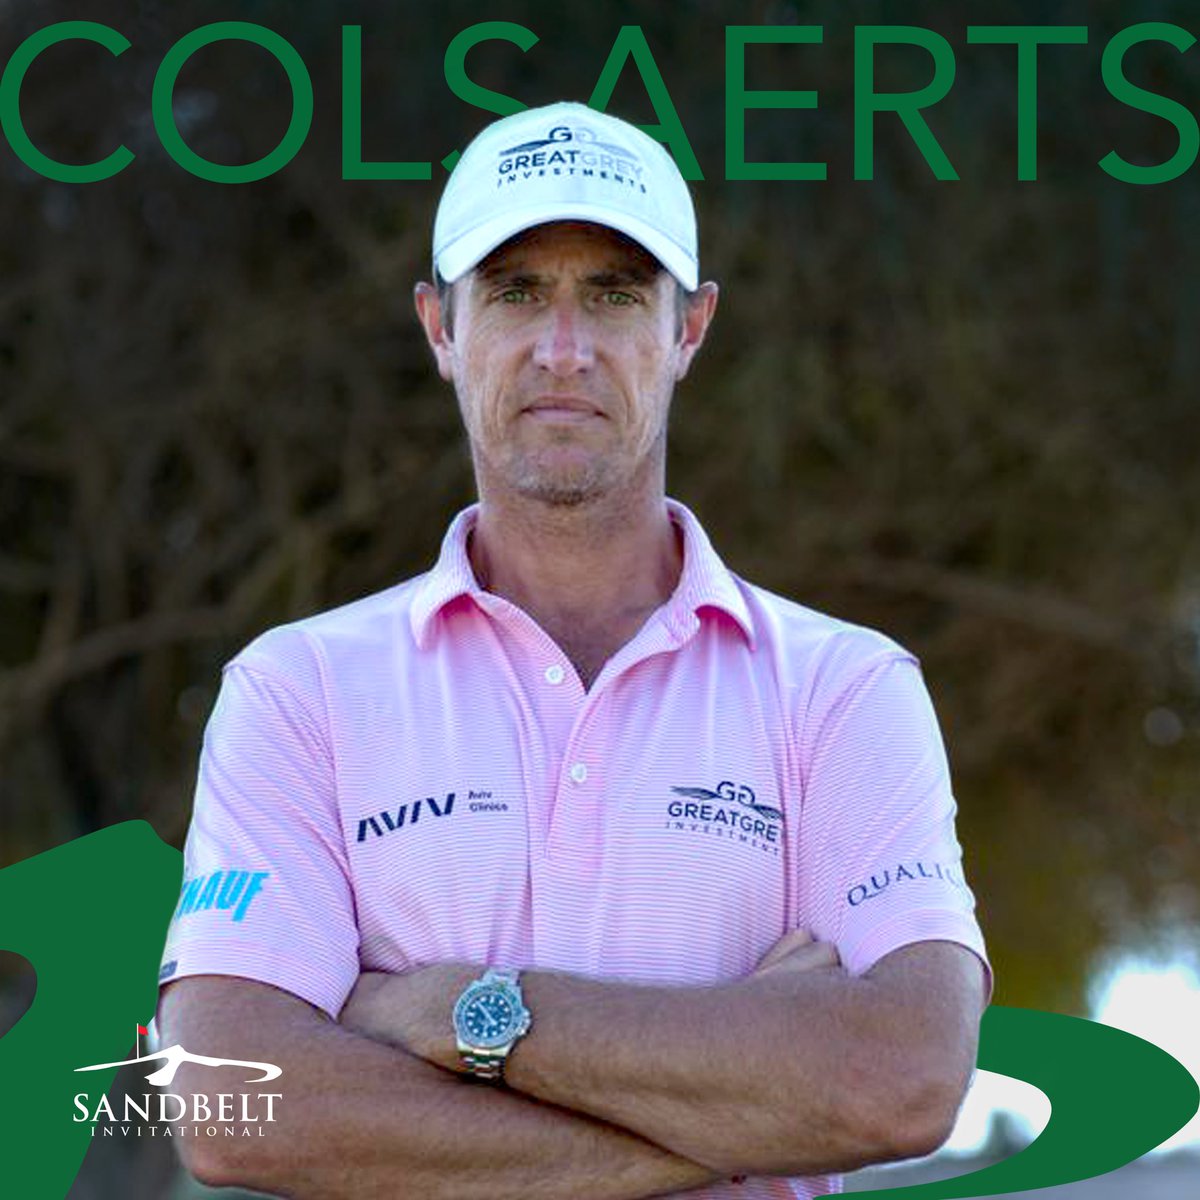 This year’s #sandbeltinvitational adds a touch of international flair and Ryder Cup heroism as we welcome @Coelsss to the field 💫

📰: bit.ly/3GA0AiU

#visitvictoria #visitmelbourne #agolfinggreat #melbournesandbelt #geoffogilvyfoundation